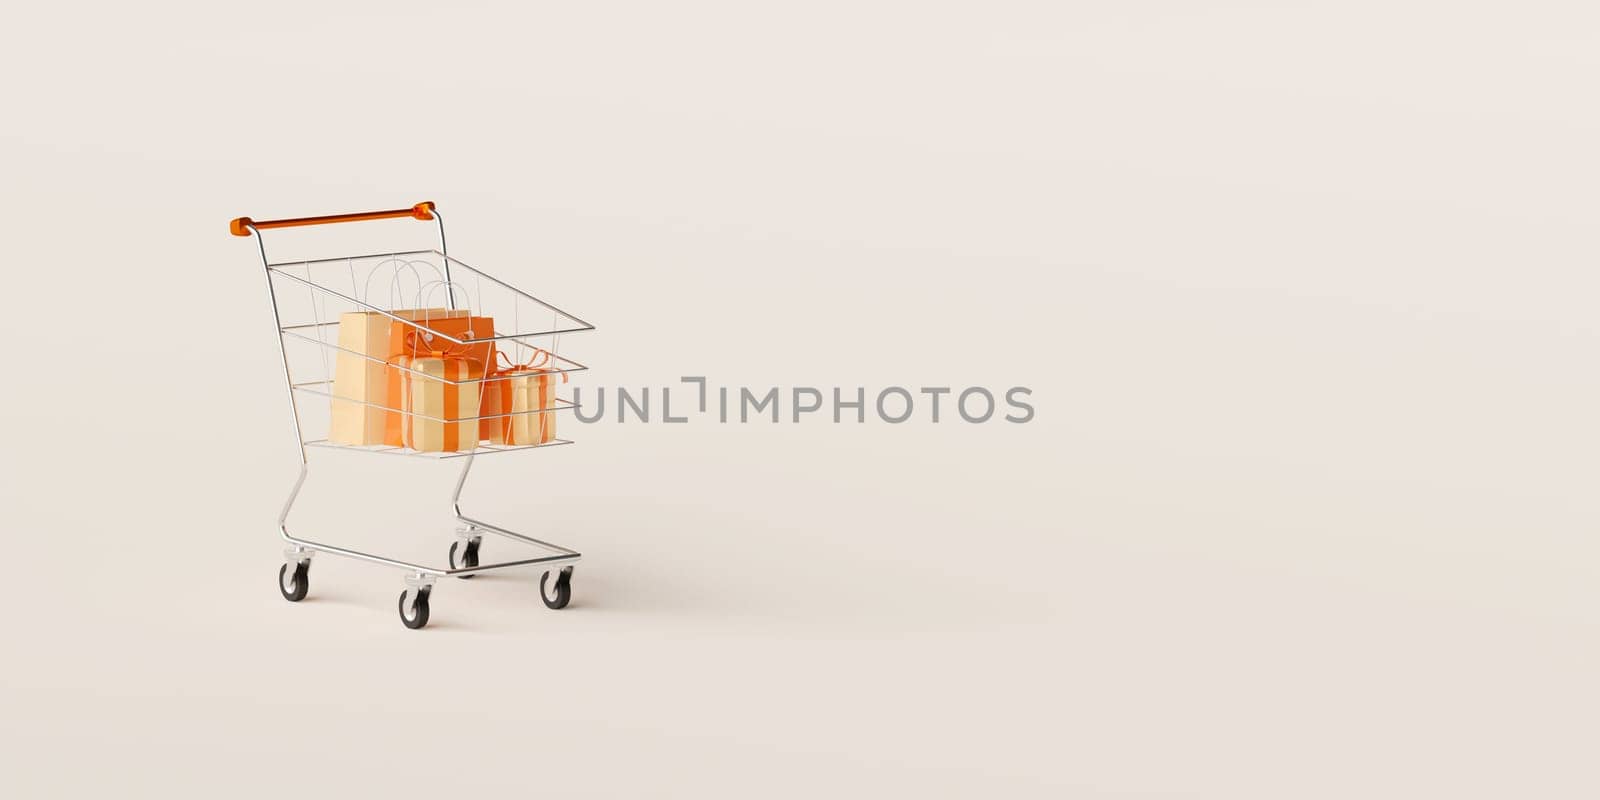 3d illustration of Shopping cart with gift box and shopping bag, banner of advertisement